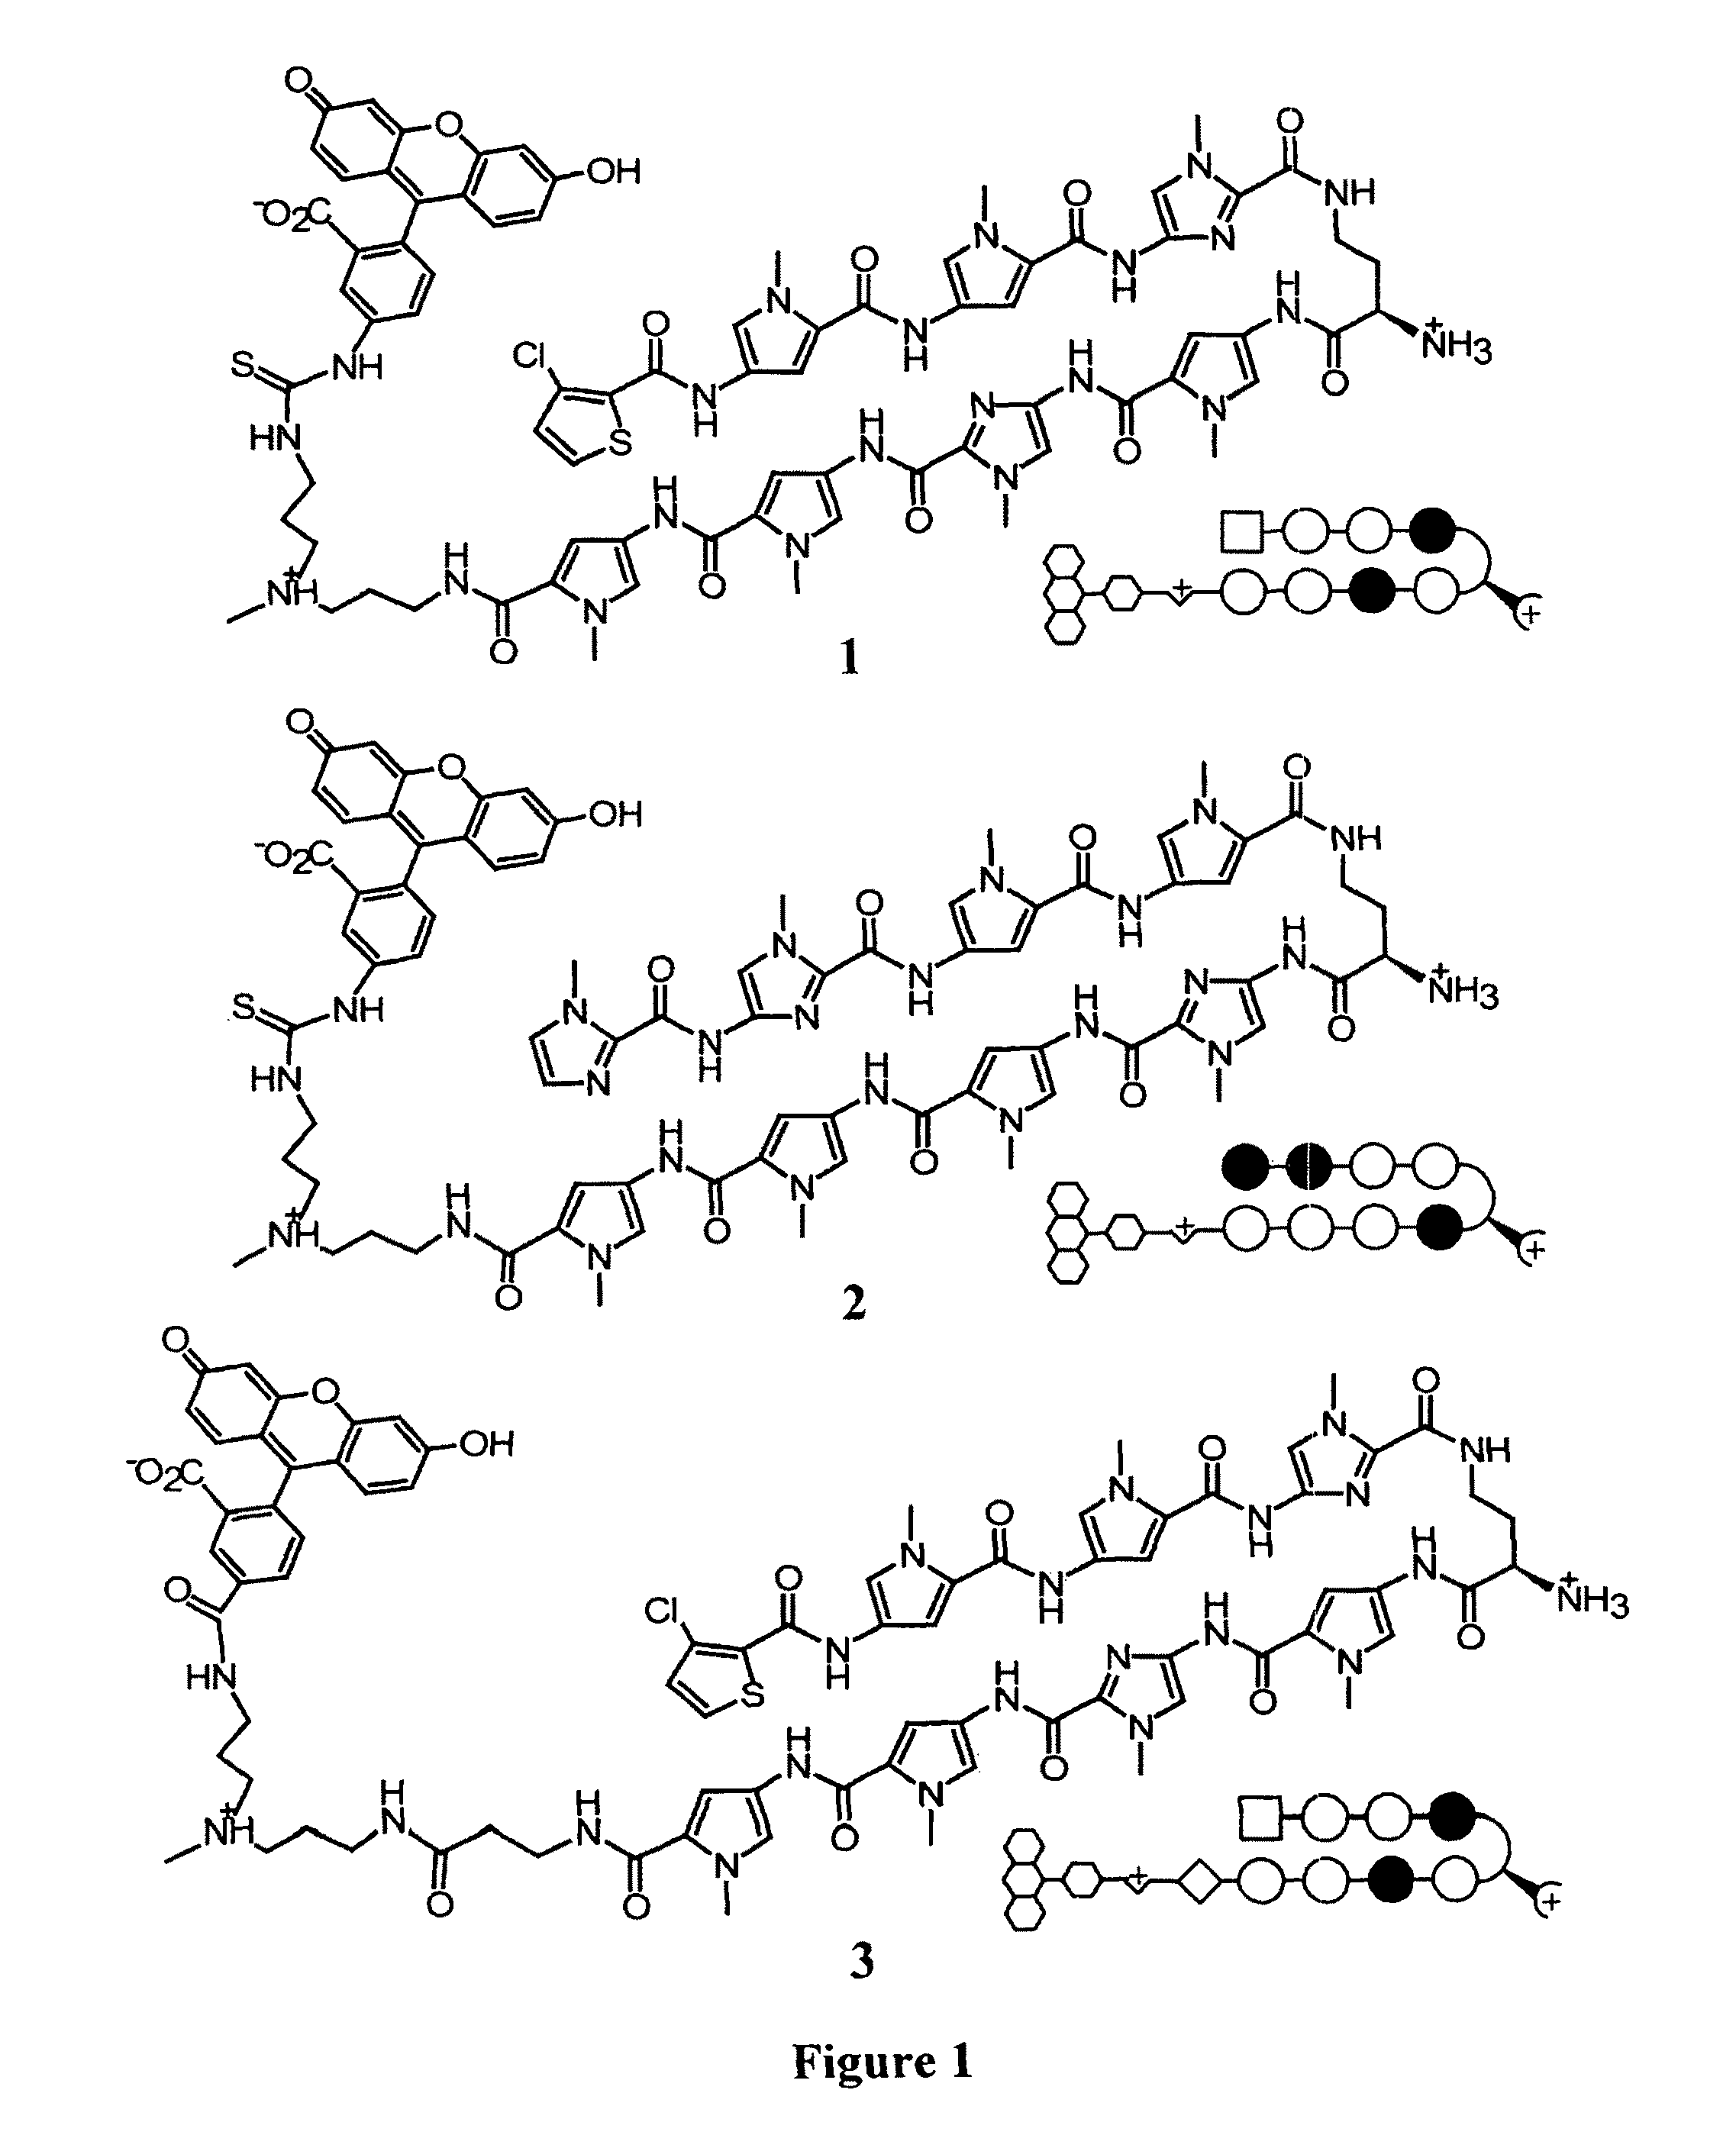 Polyamides with tail structures capable of binding DNA